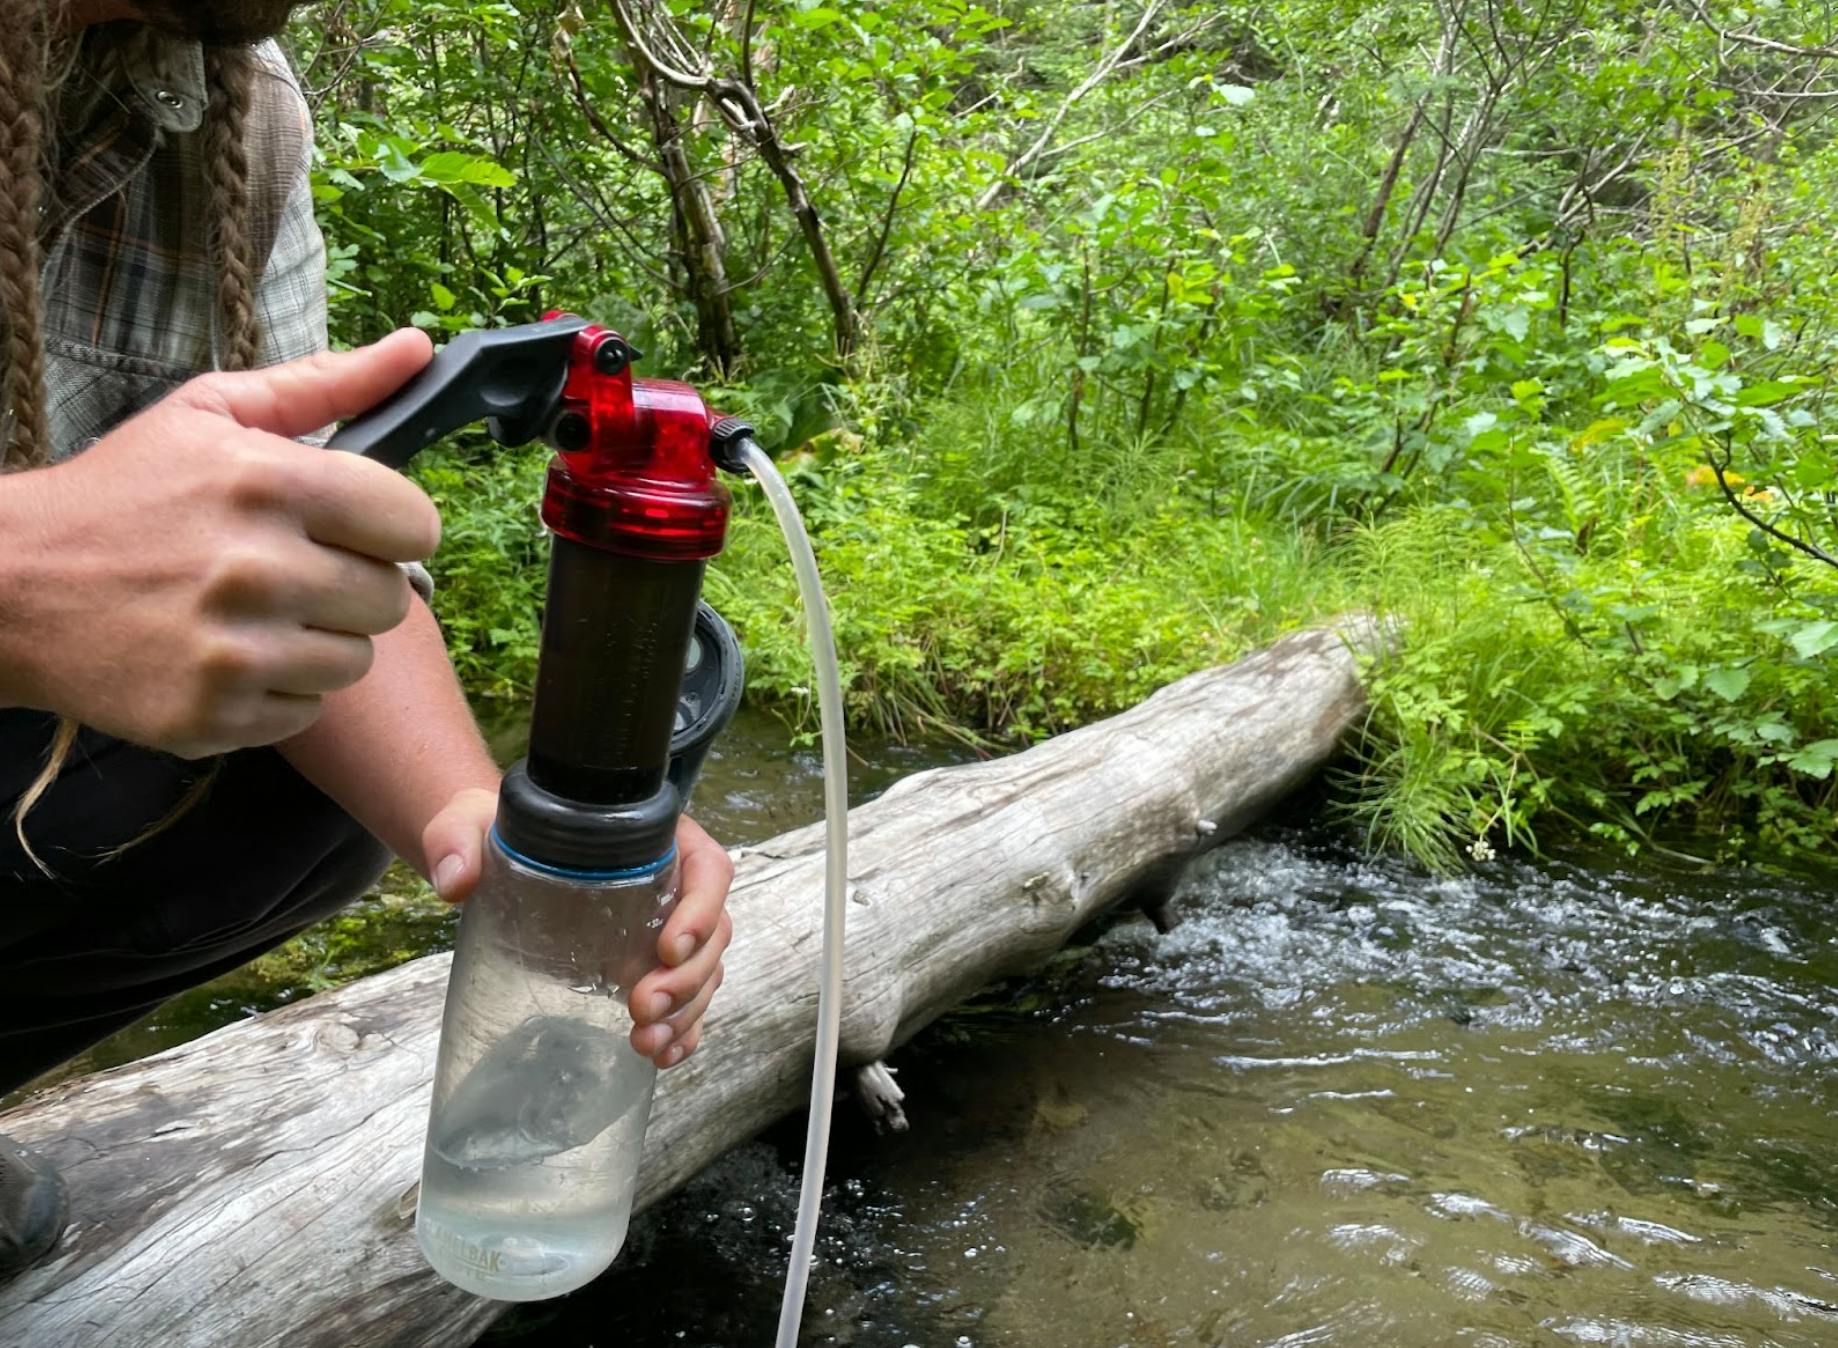 The author's partner pumps water into their water bottle with the MSR Miniworks EX filter as they squat on a log crossing a creek.